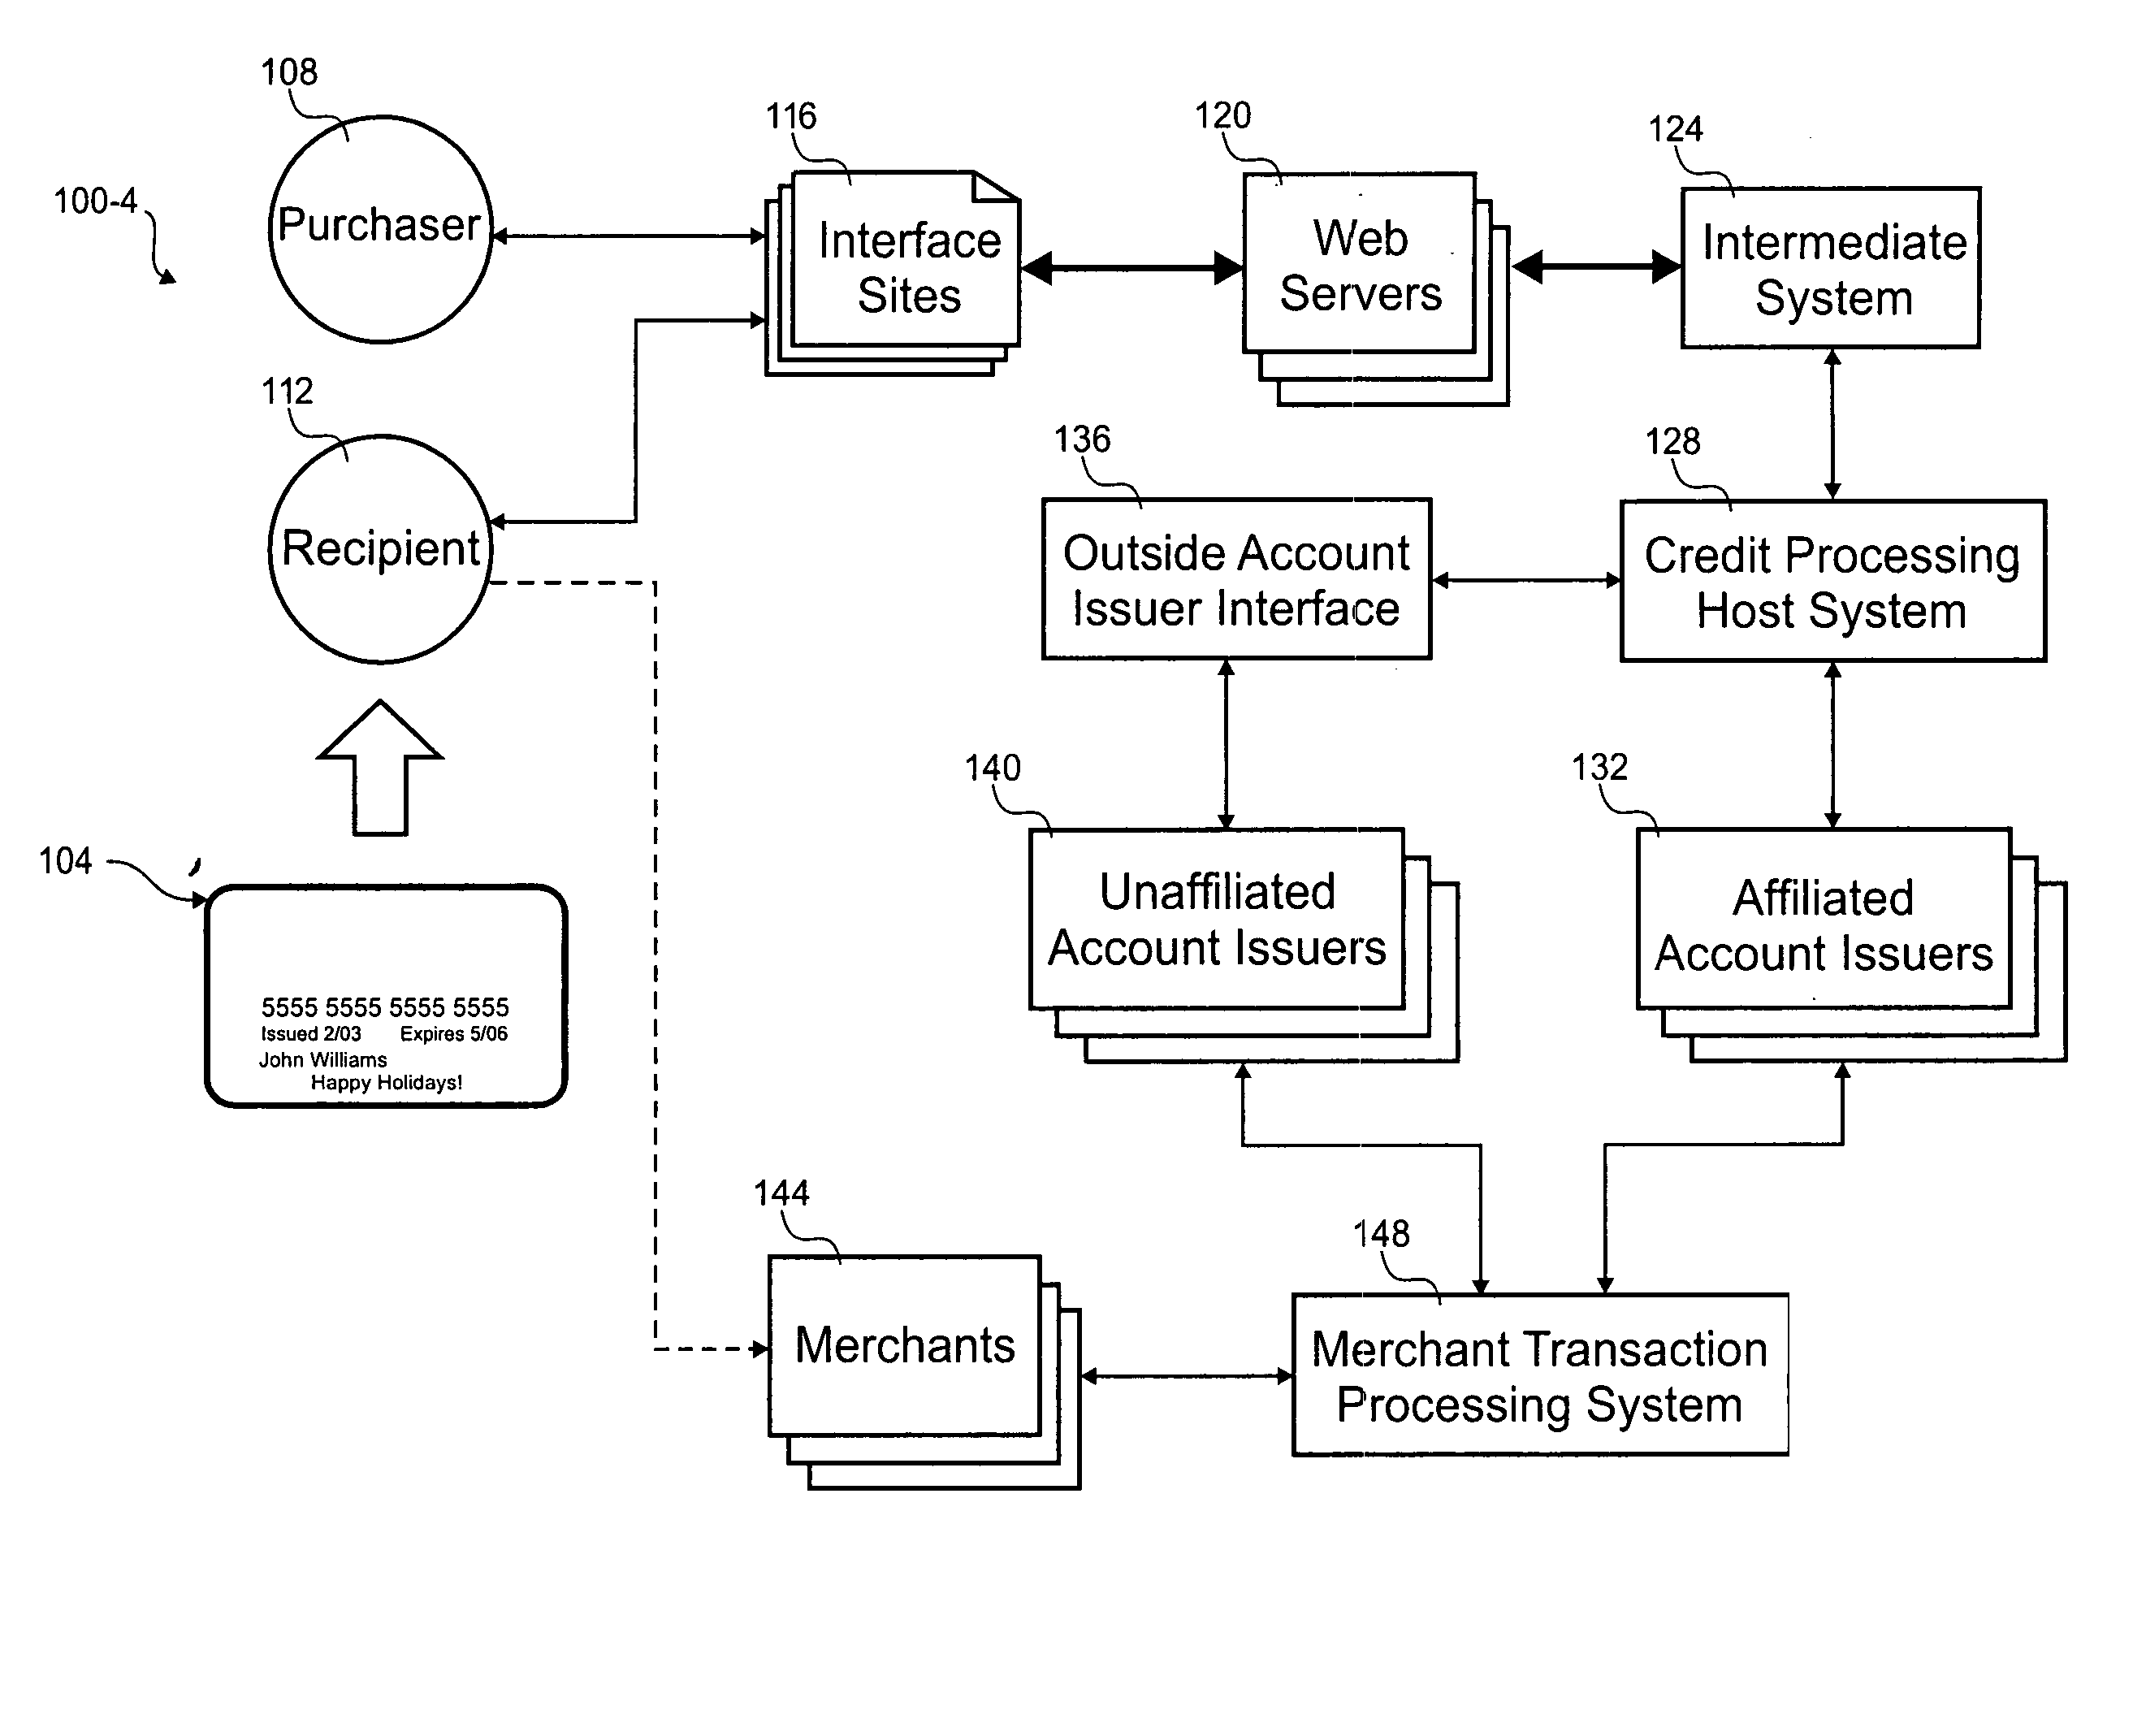 Open loop stored value system